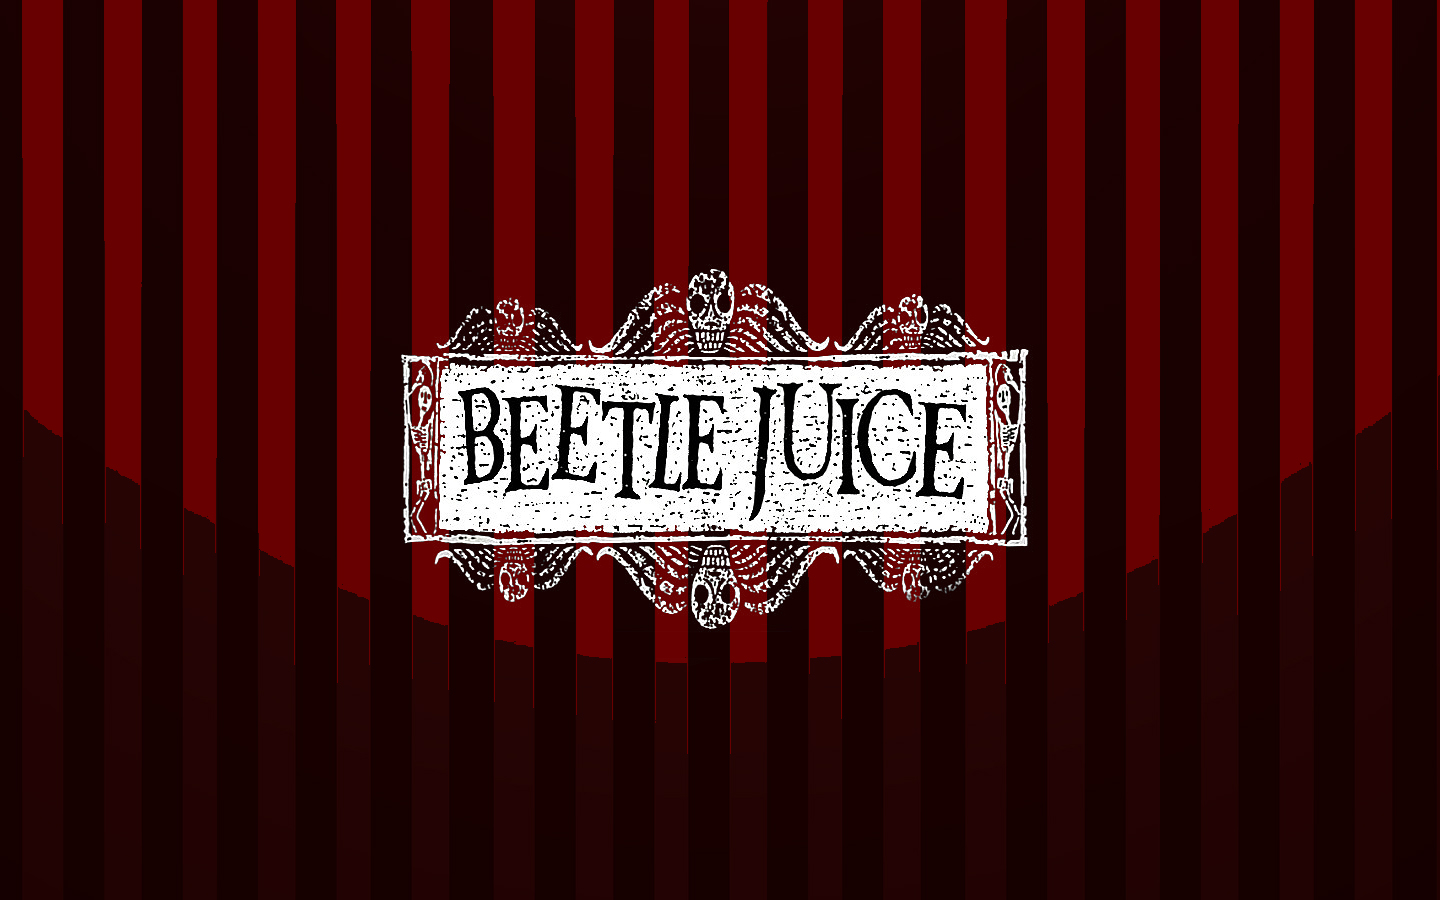 Pin The Joker Beetle Juice HD Wallpaper Insects Bugs On